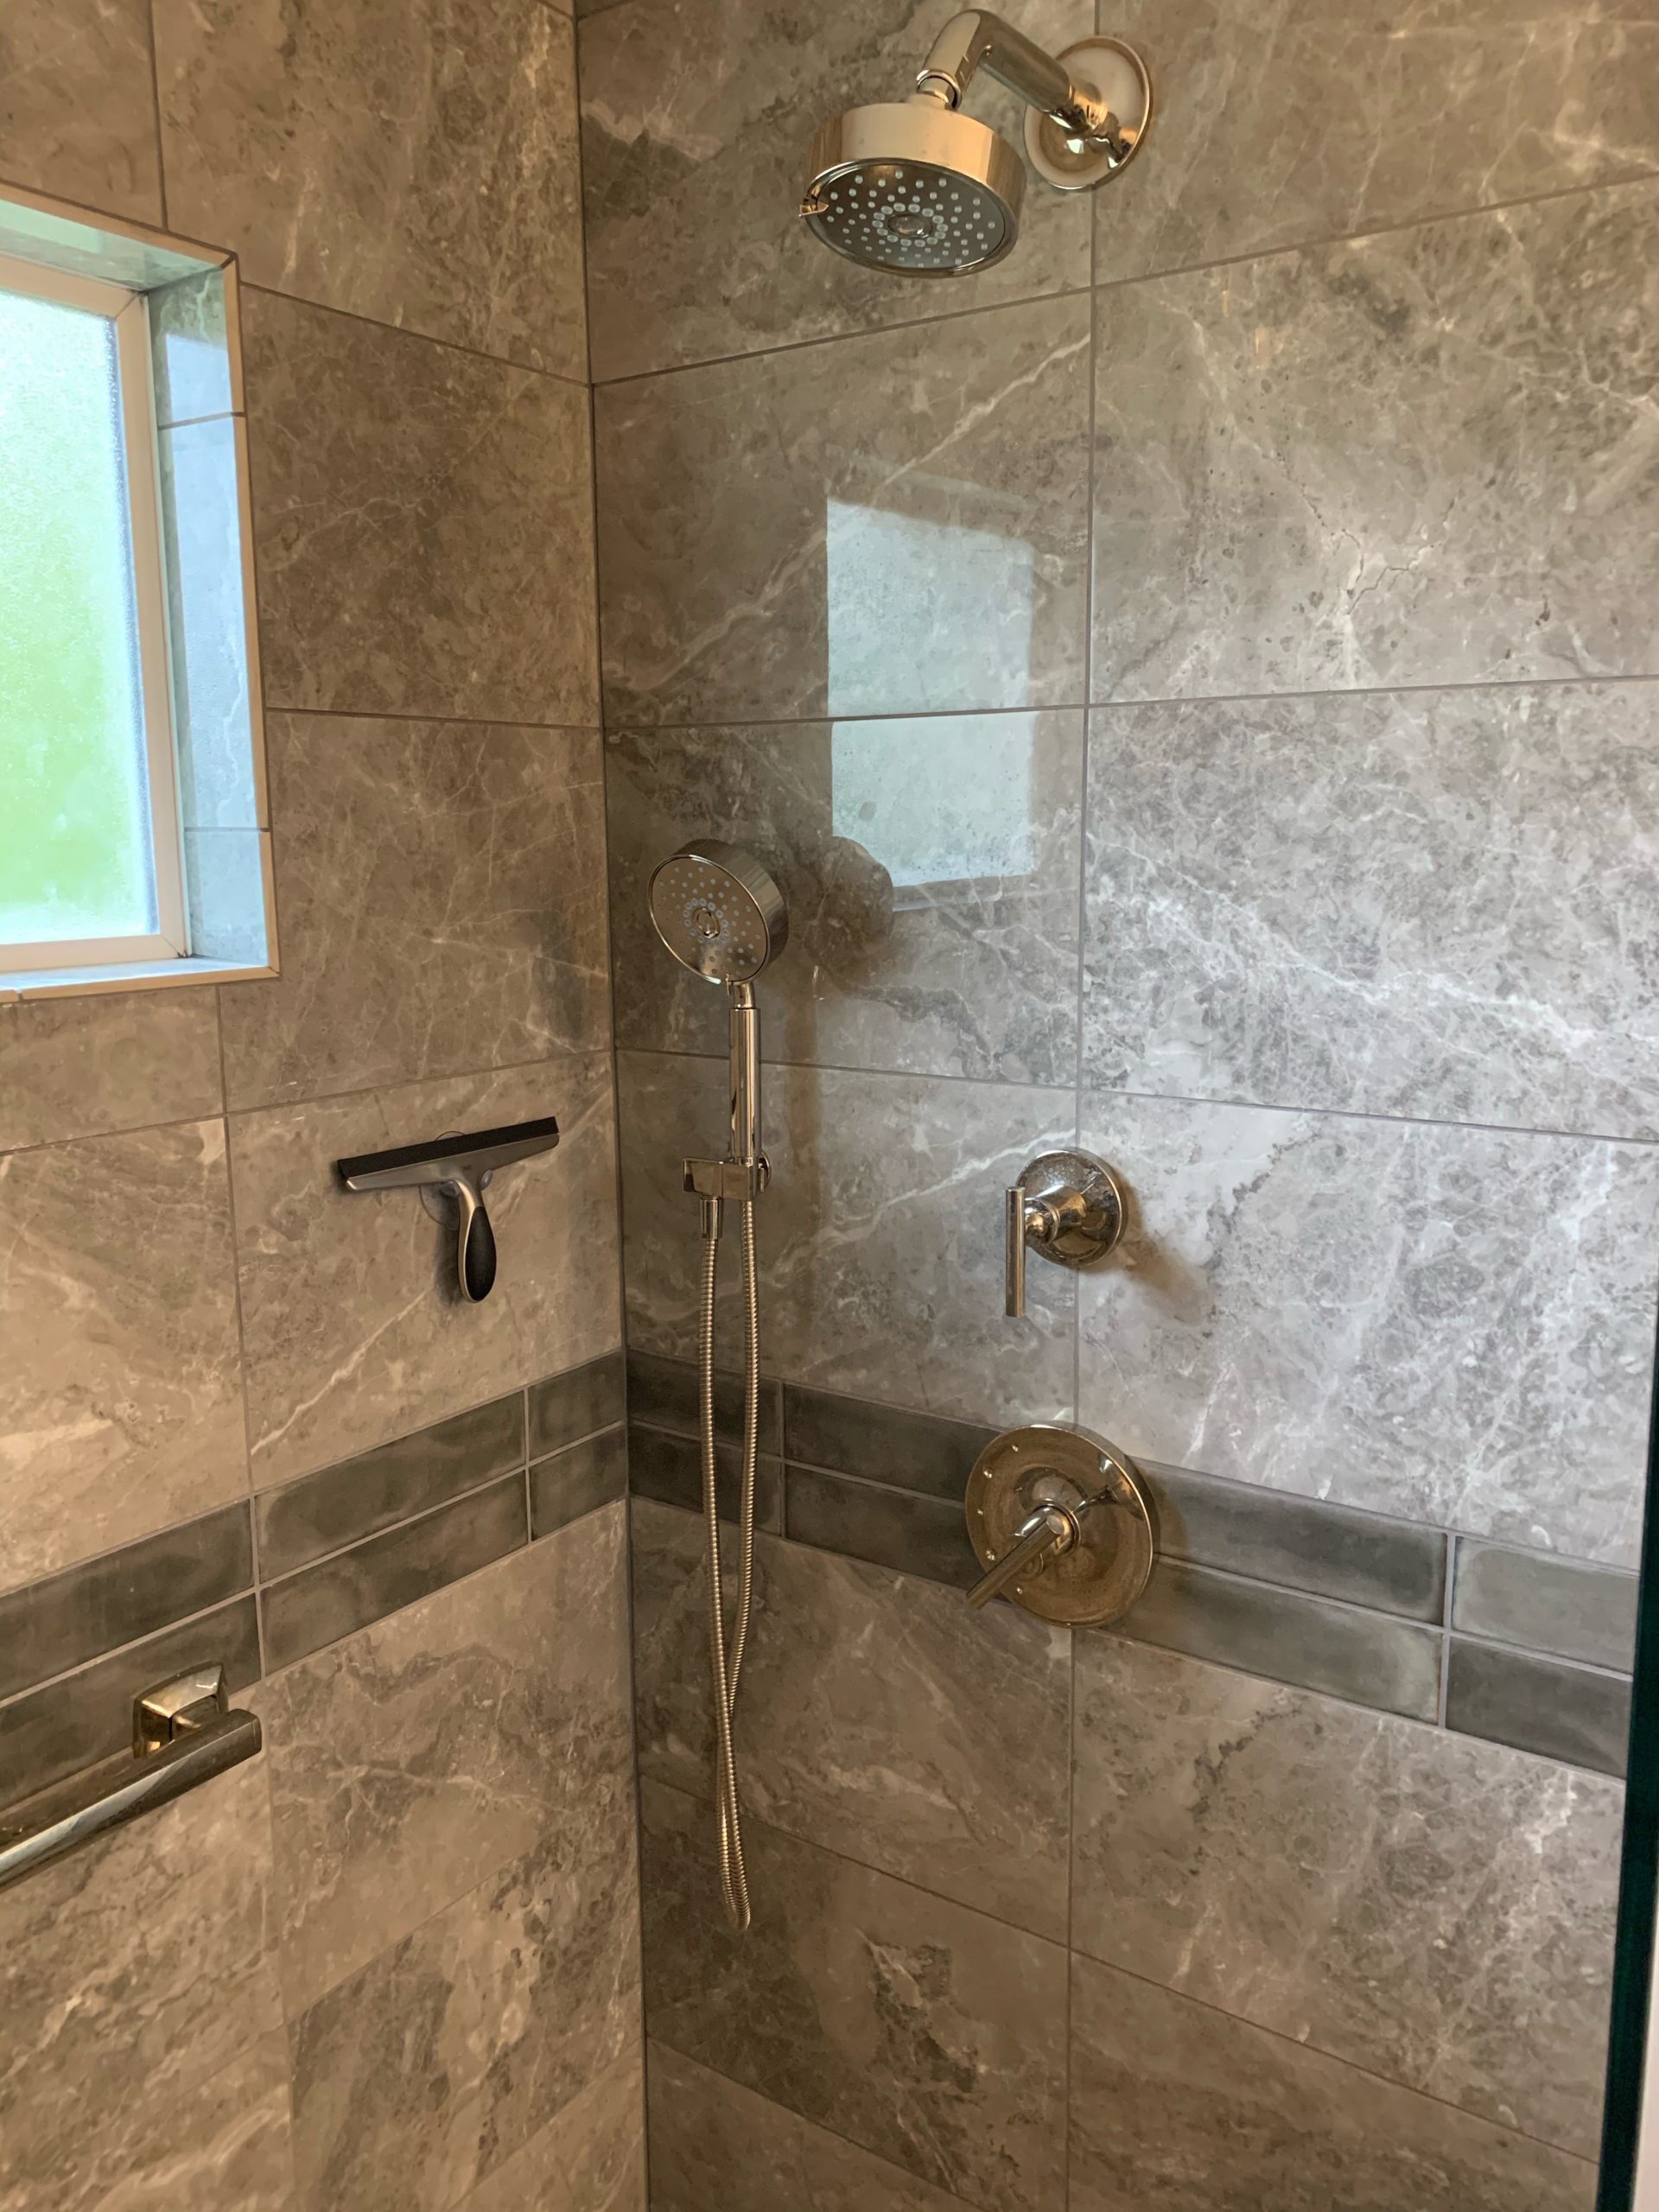 Lexington-area shower remodel with brand new shower head and fixtures